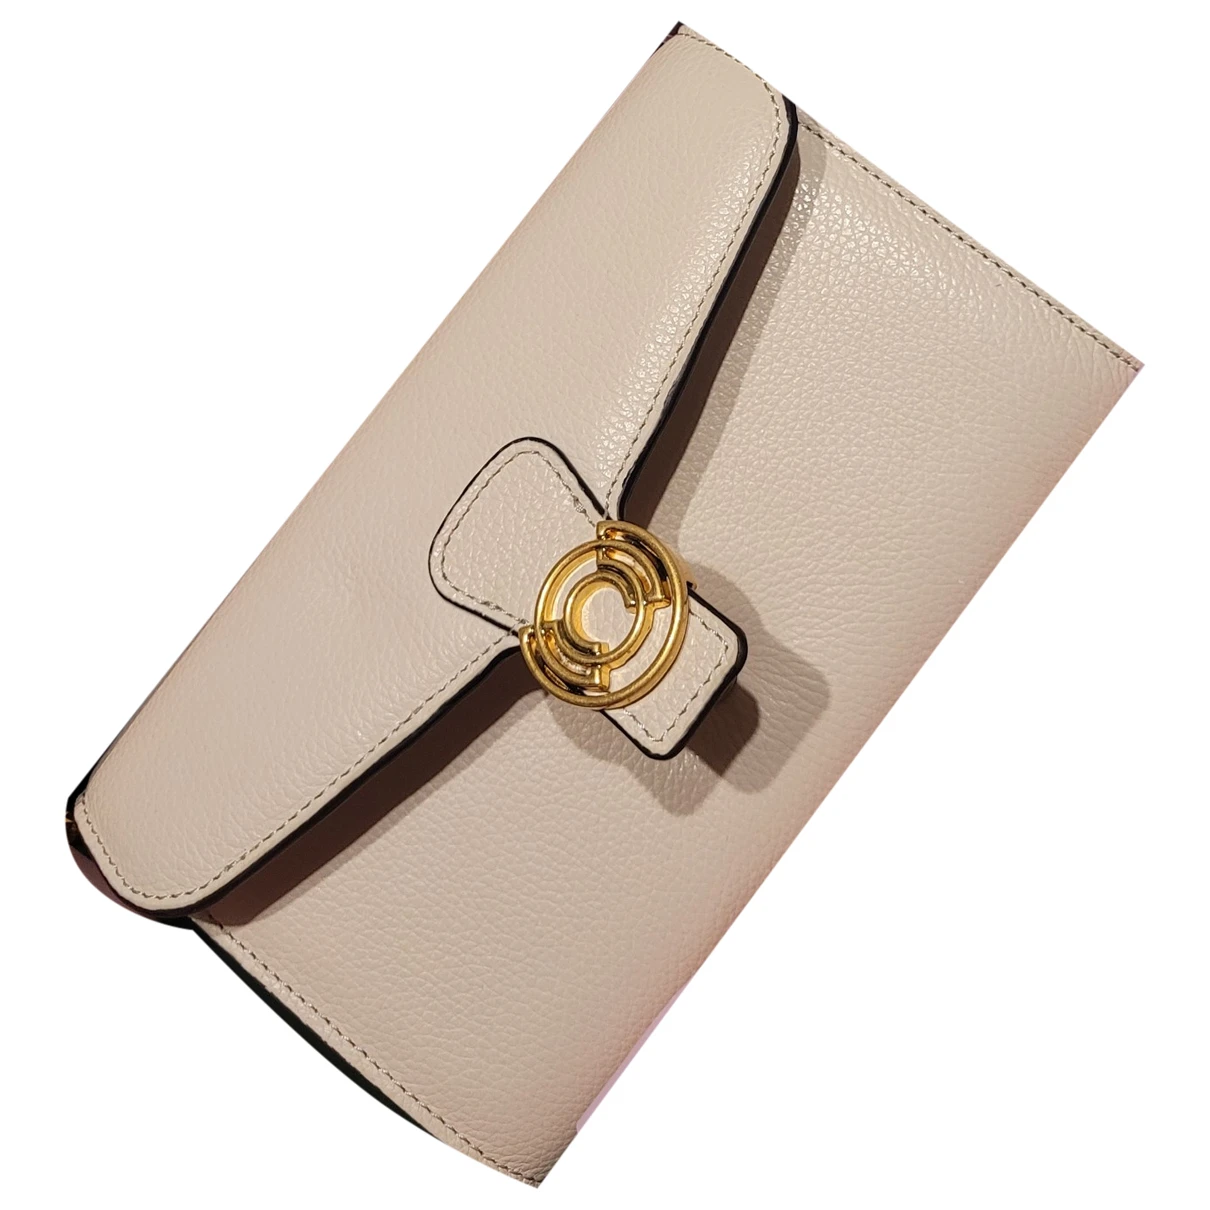 Pre-owned Coccinelle Leather Clutch Bag In Beige